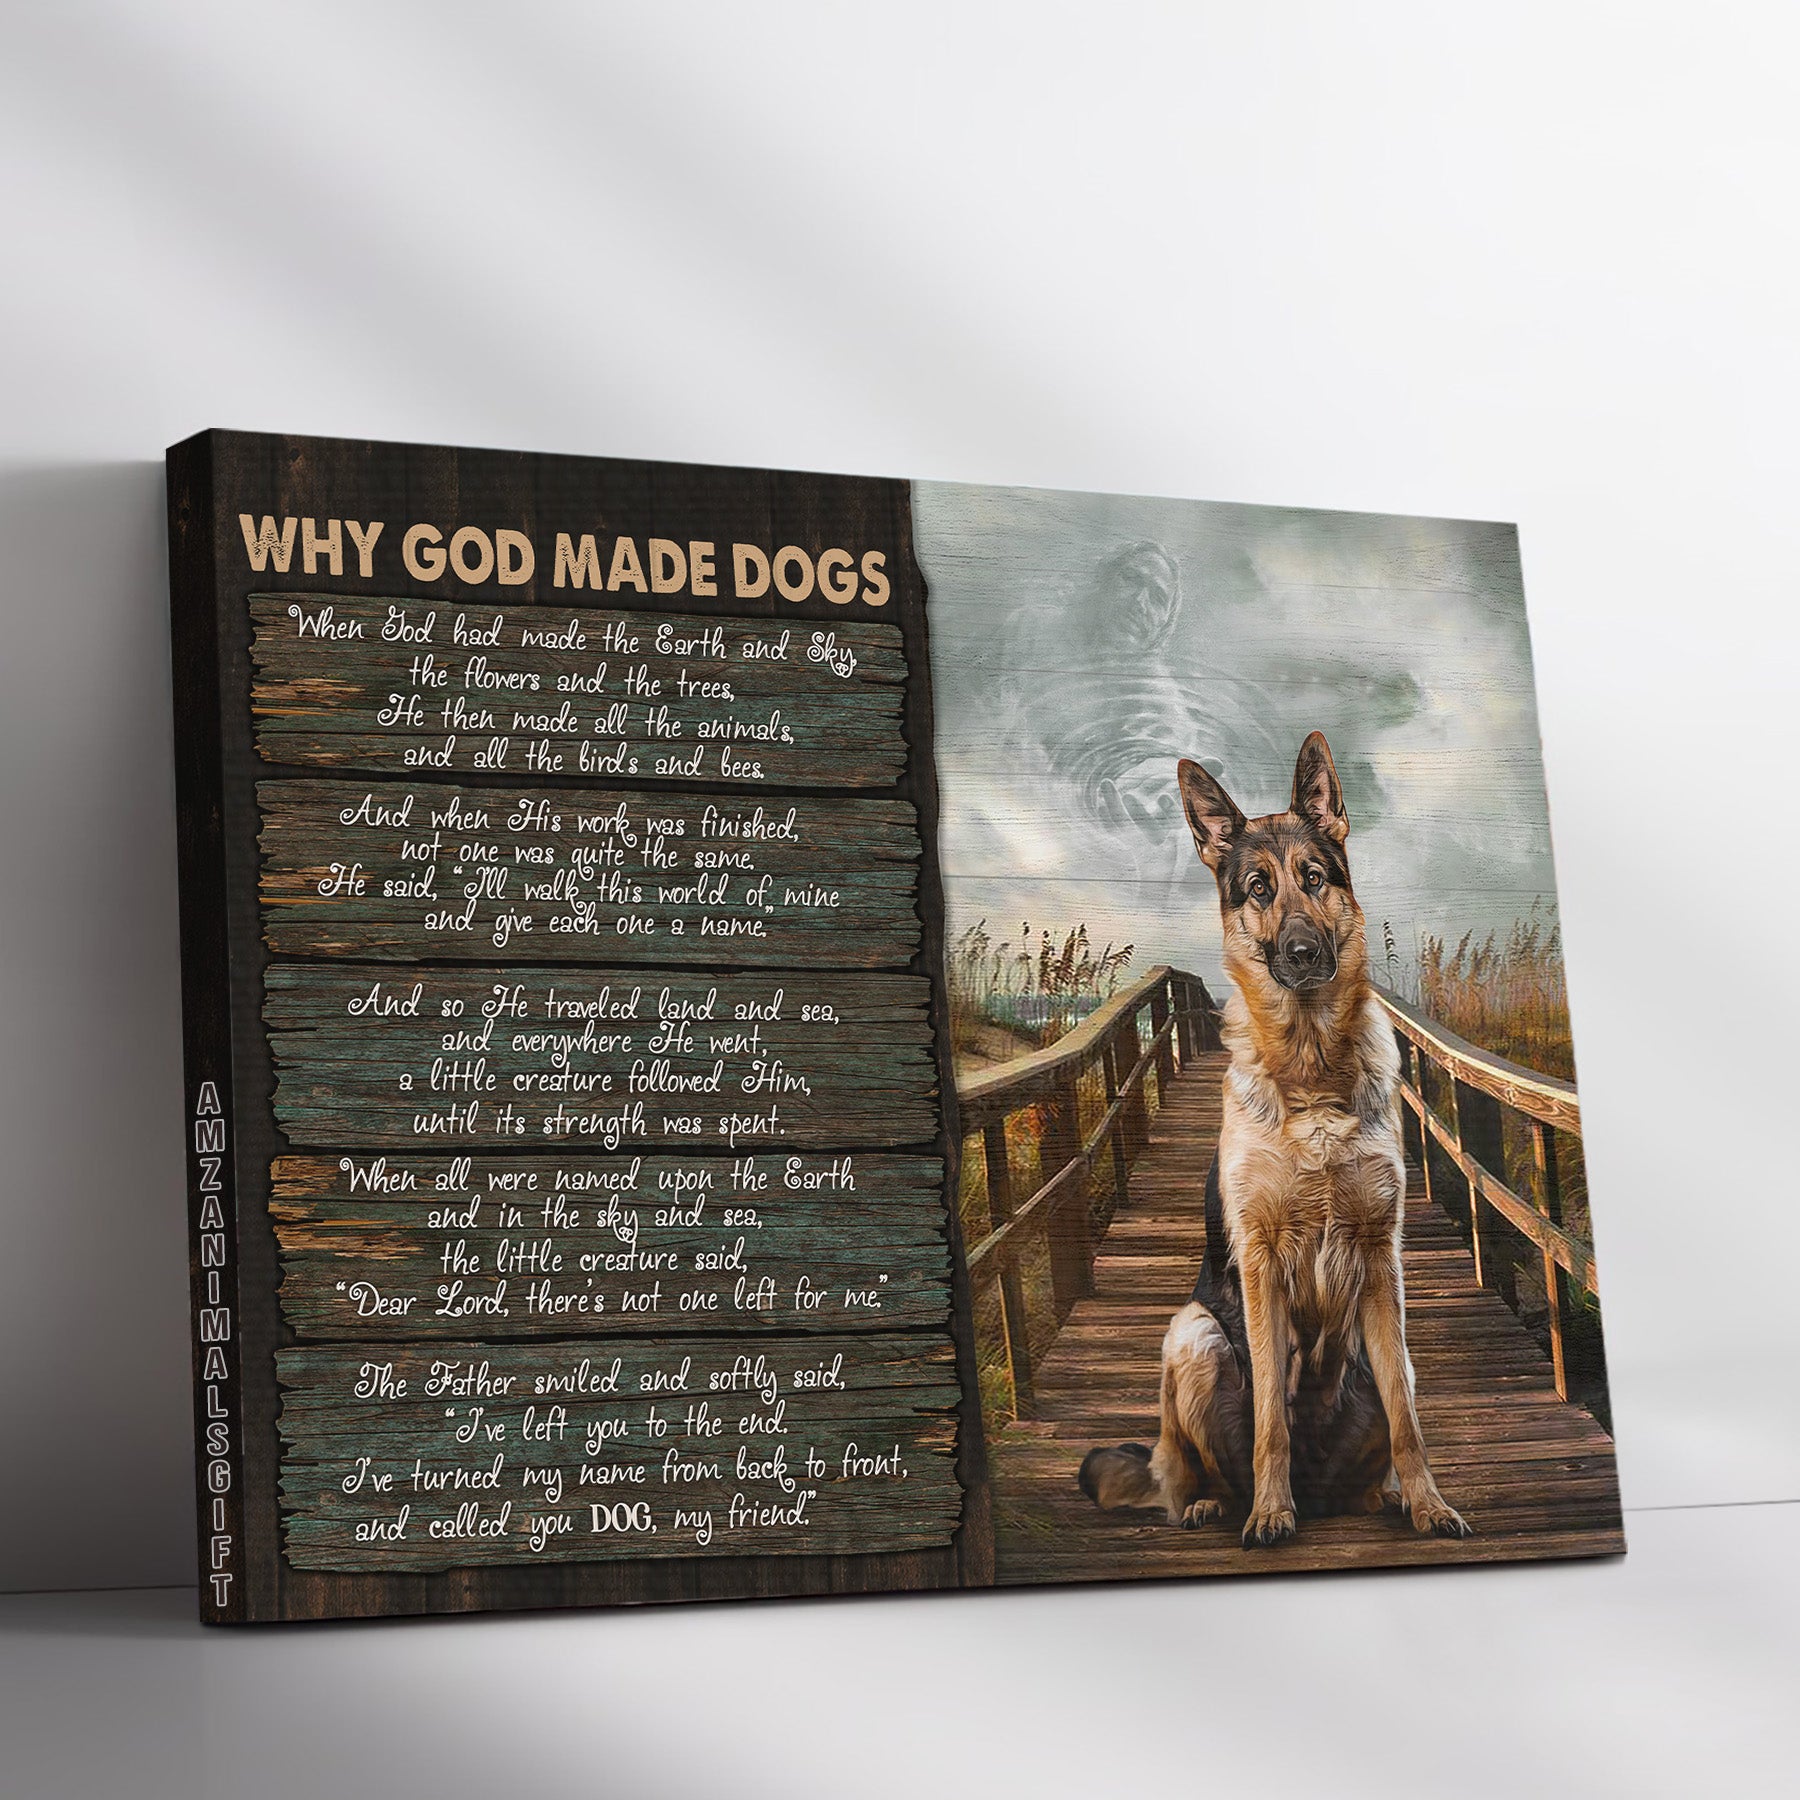 German Shepherd & Jesus Premium Wrapped Landscape Canvas - German Shepherd, The Bridge, Jesus Painting, Why God Made Dogs - Gift For Christian